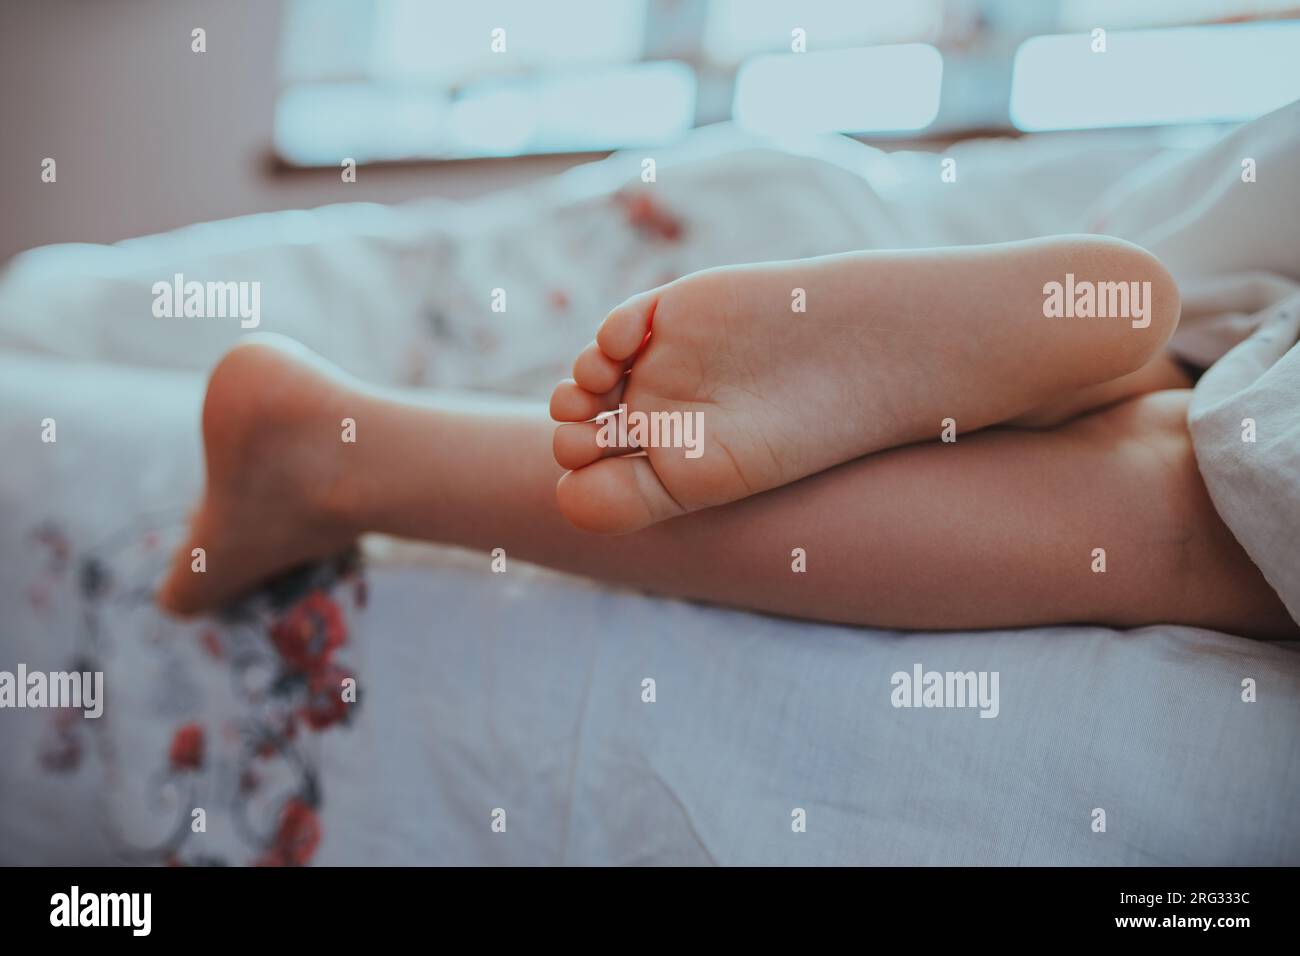 Feet of a sleeping baby on the bed Stock Photo